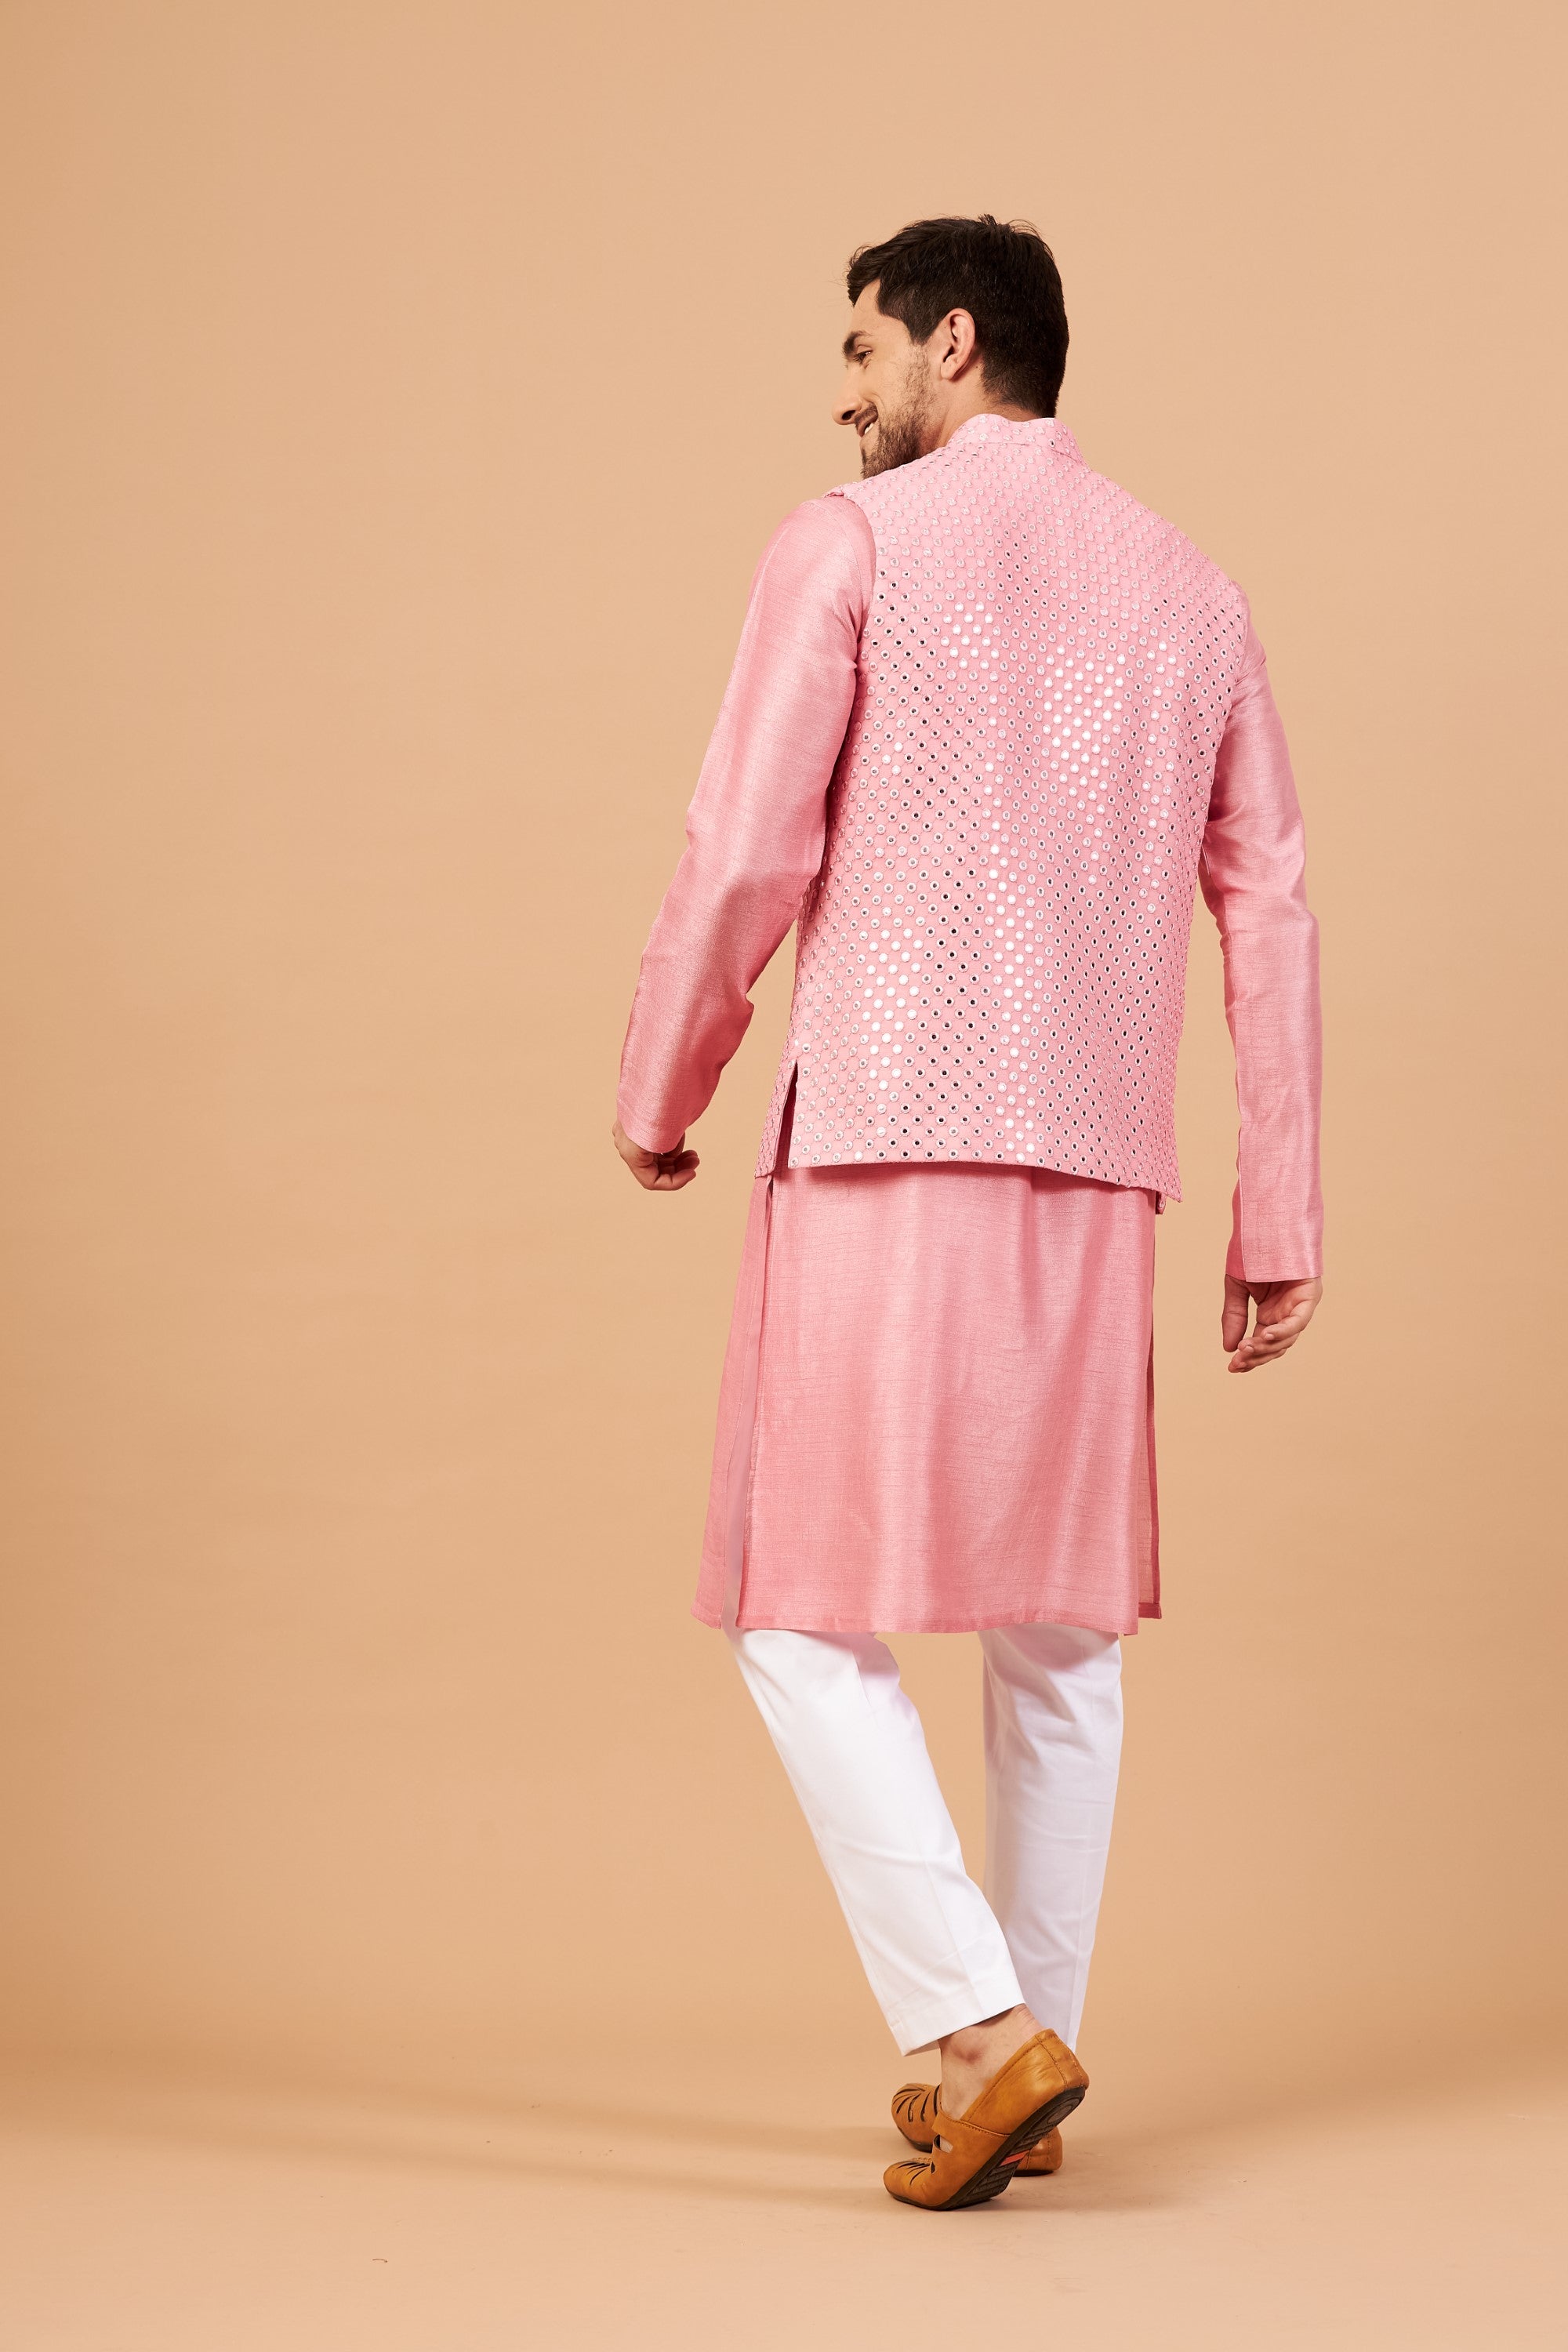 Floral printed nehru jacket with white kurta and pyjama - set of 3 by The  Weave Story | The Secret Label